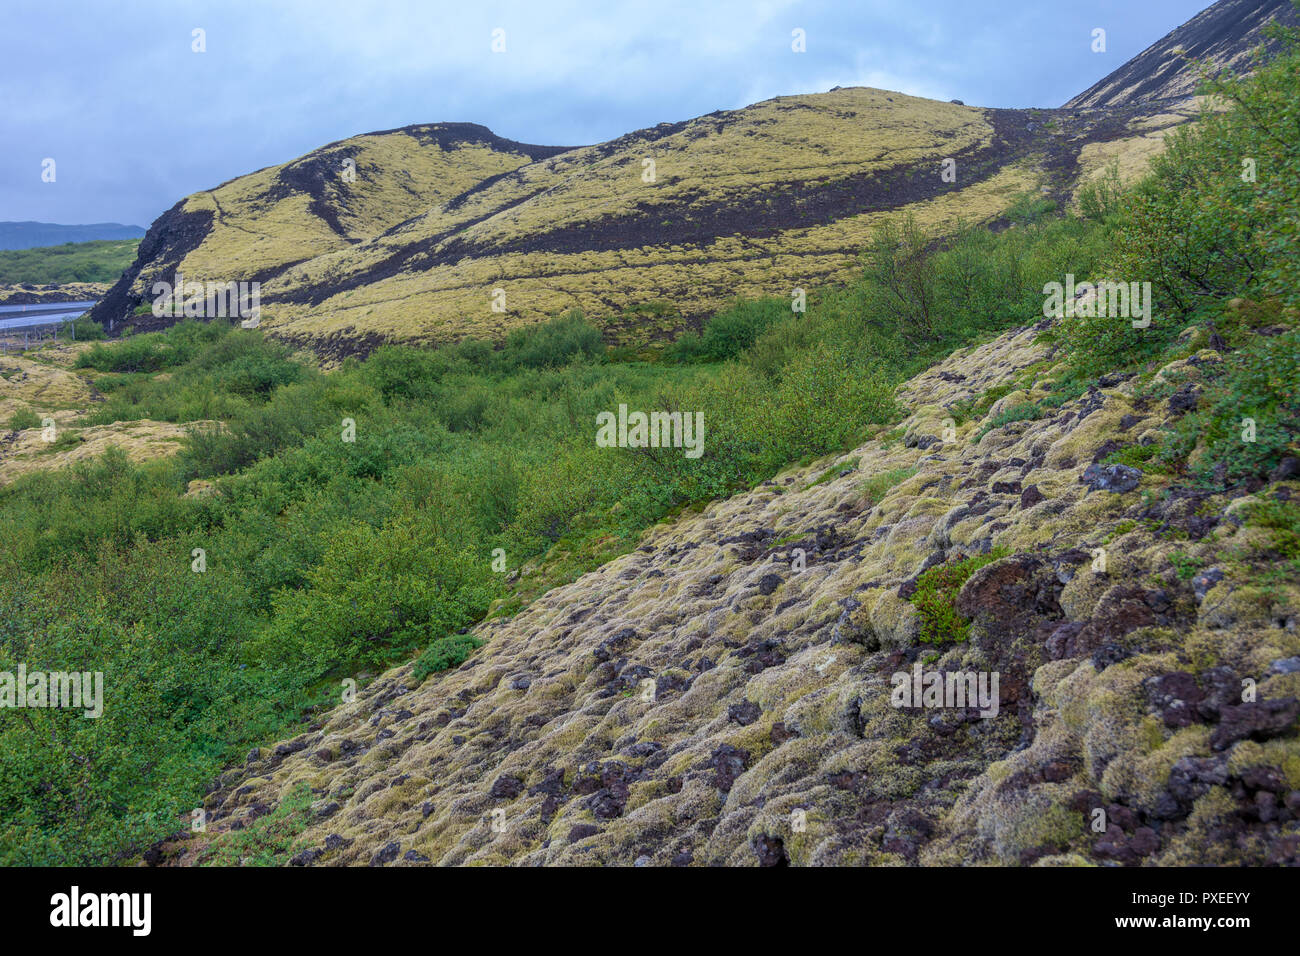 Lava lunar landscape on the climb to Grabrok Crater in Iceland Stock Photo